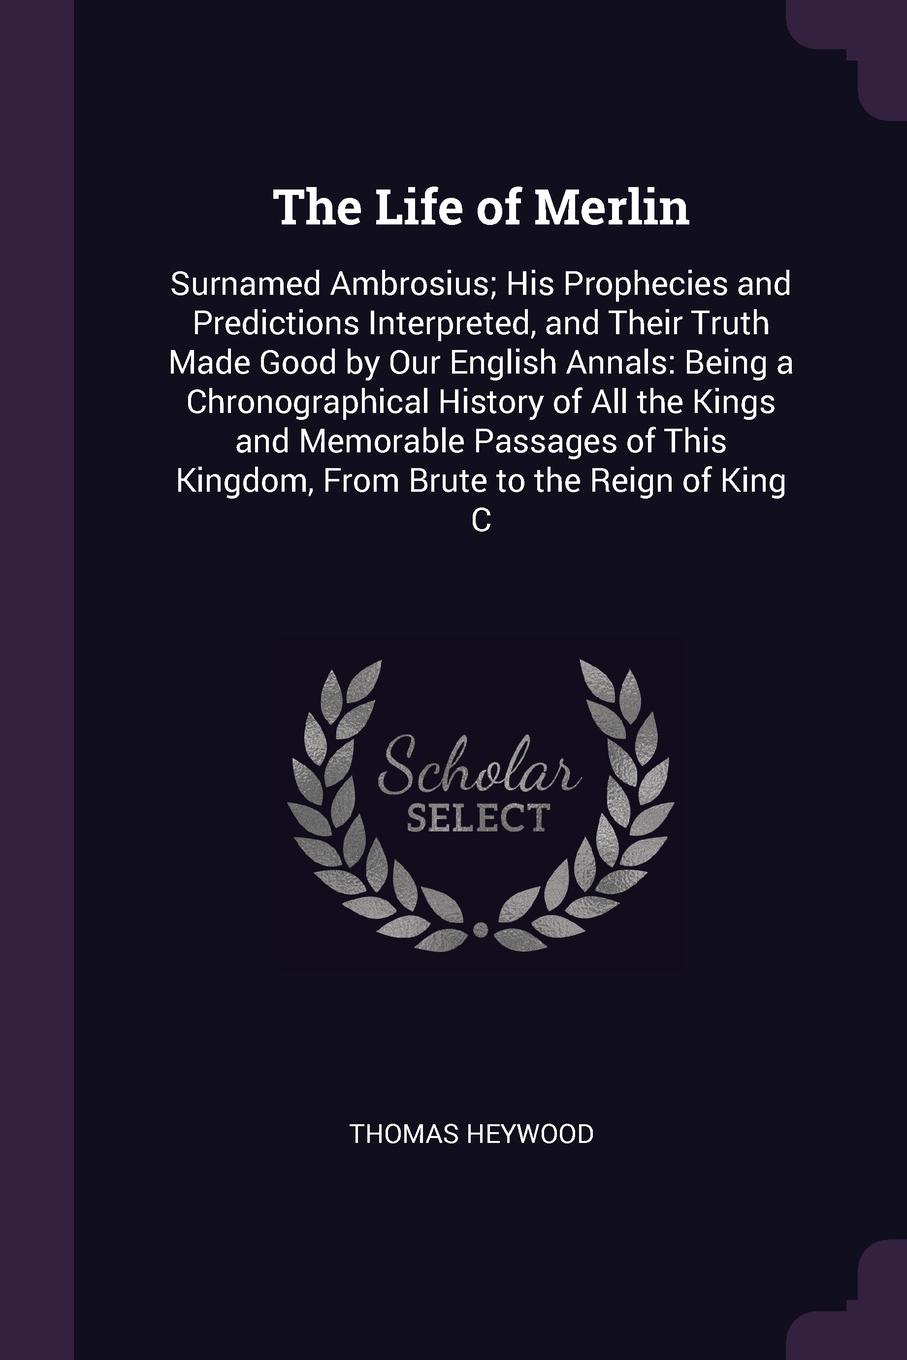 The Life of Merlin. Surnamed Ambrosius; His Prophecies and Predictions Interpreted, and Their Truth Made Good by Our English Annals: Being a Chronographical History of All the Kings and Memorable Passages of This Kingdom, From Brute to the Reign o...